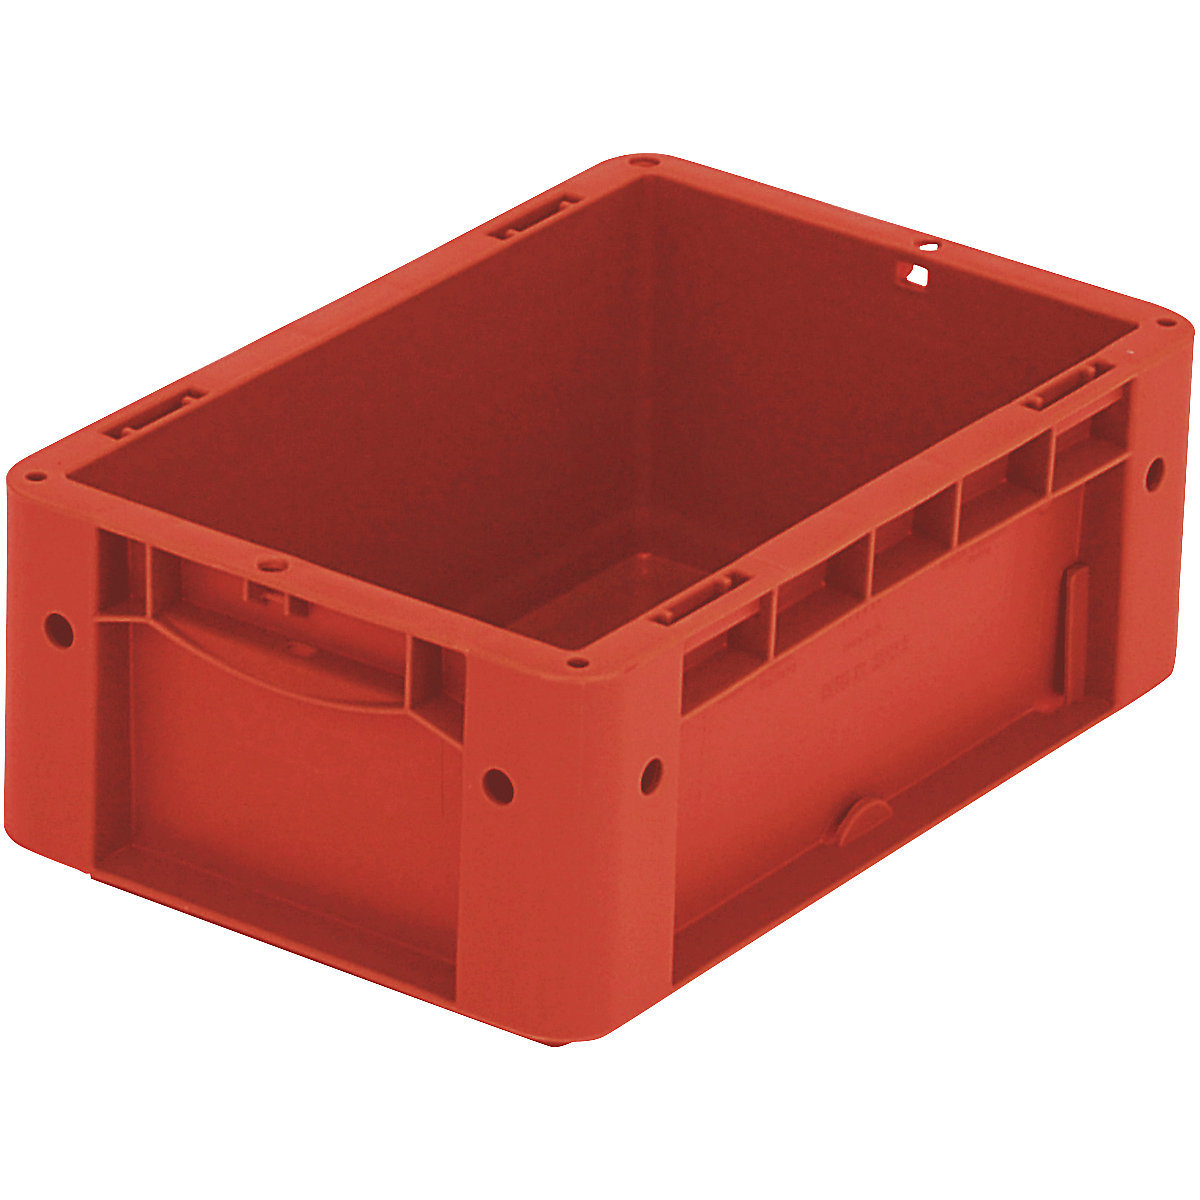 XL Euro stacking container – BITO, standard model, LxWxH 300 x 200 x 120 mm-3